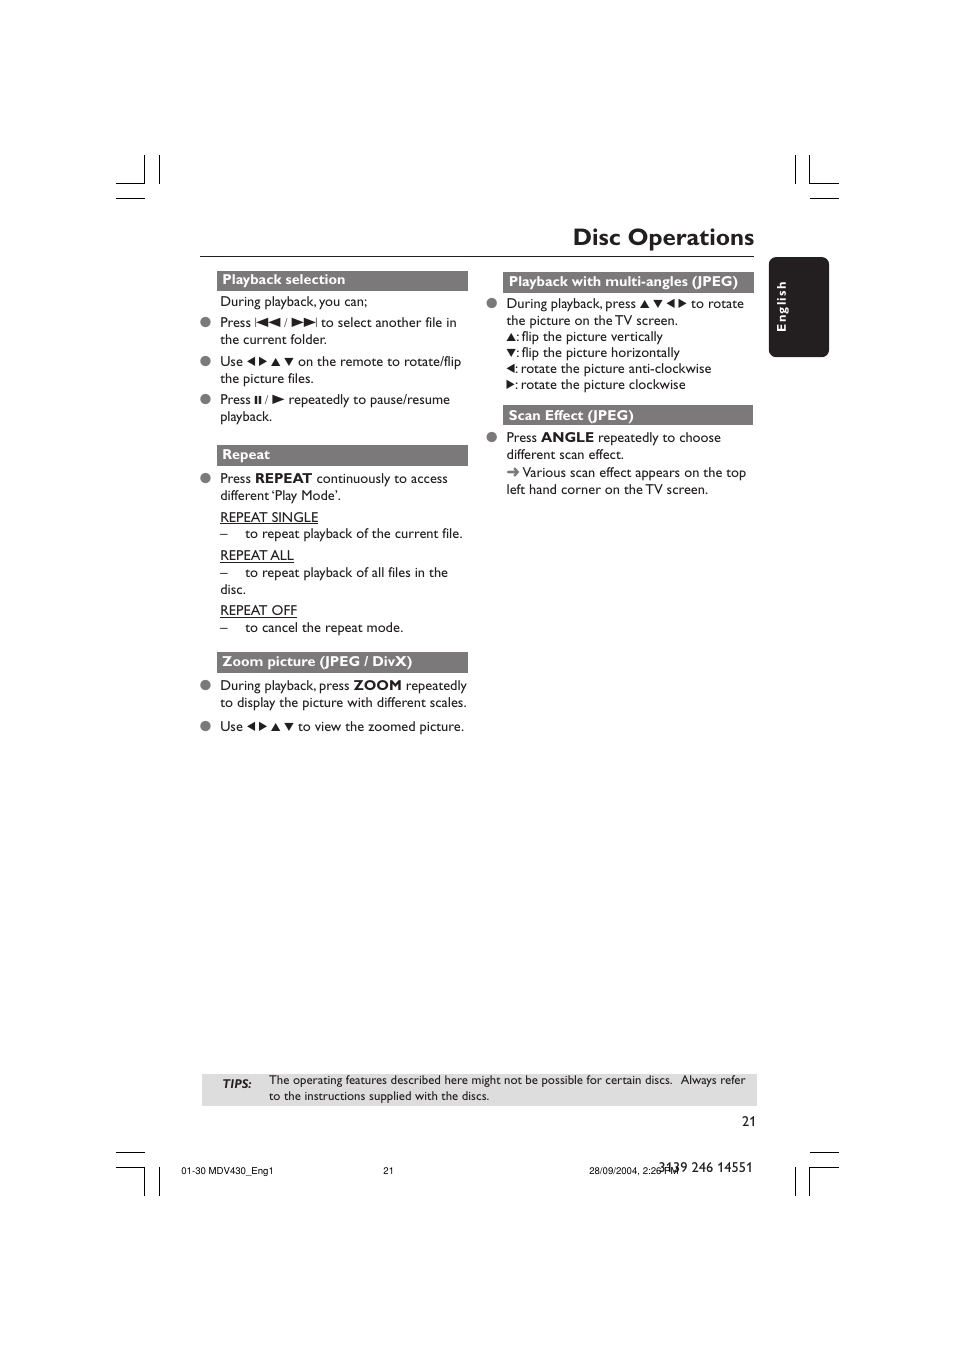 Disc operations | Philips Magnavox MDV430 User Manual | Page 21 / 30